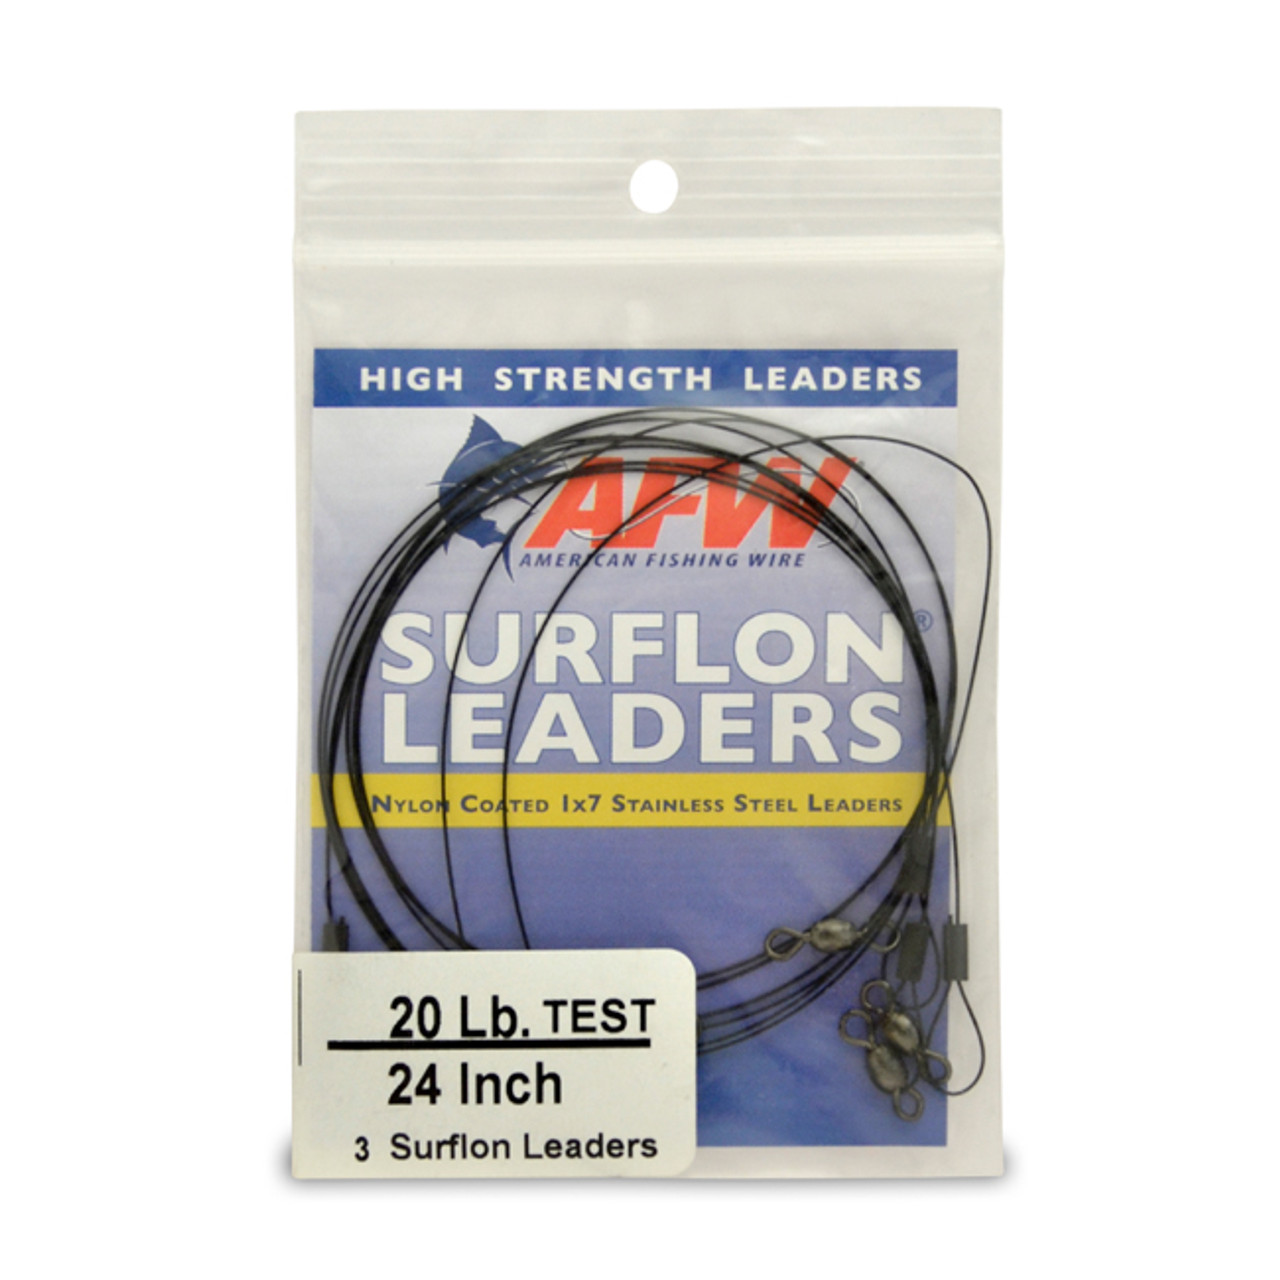 AFW - Surflon Leaders Nylon Coated 1x7 Stainless Steel Wire